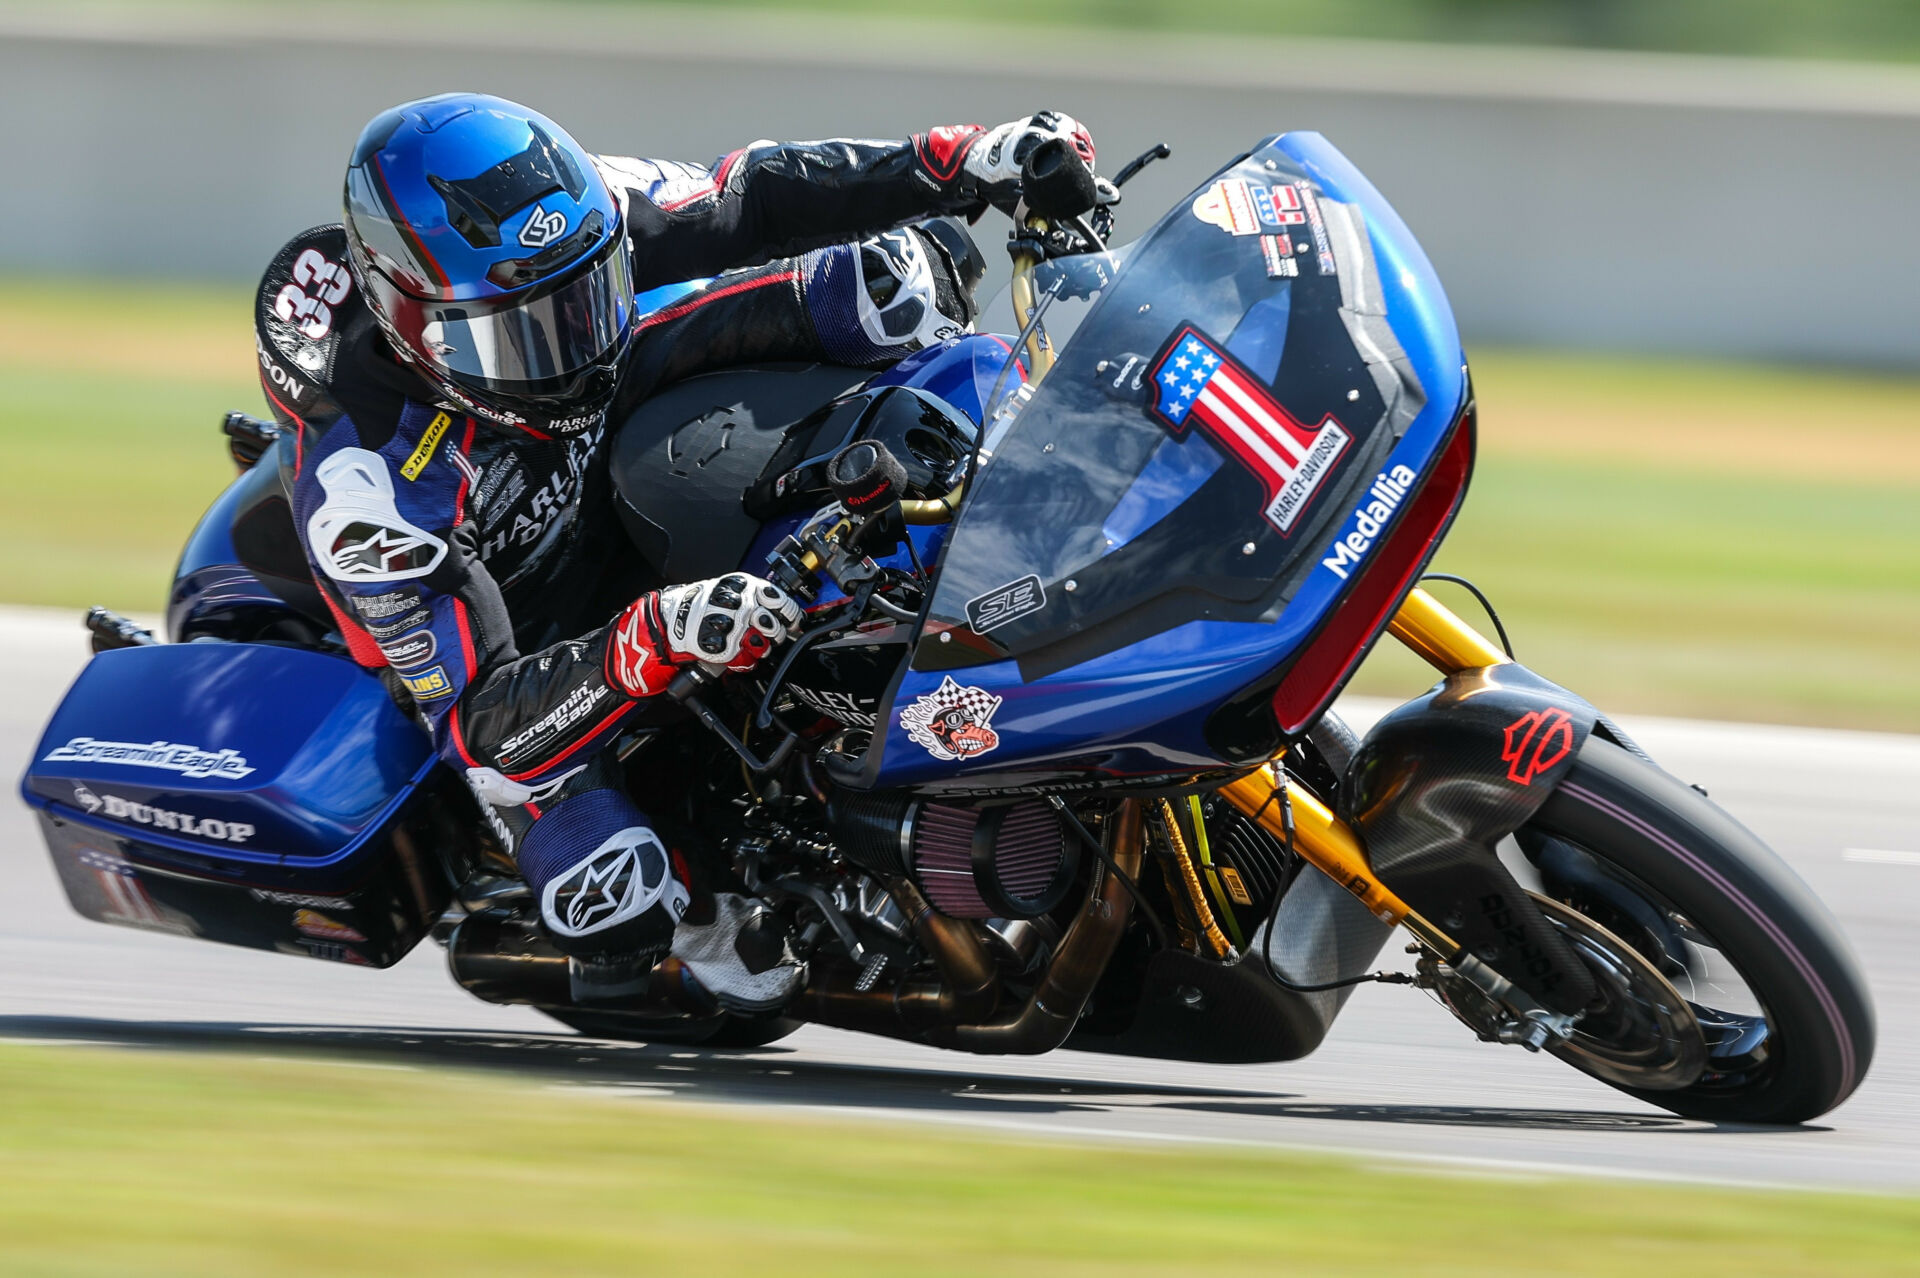 6D Helmets-sponsored Kyle Wyman (1), as seen during the 2022 MotoAmerica Mission King Of The Baggers season. Photo by Brian J. Nelson.